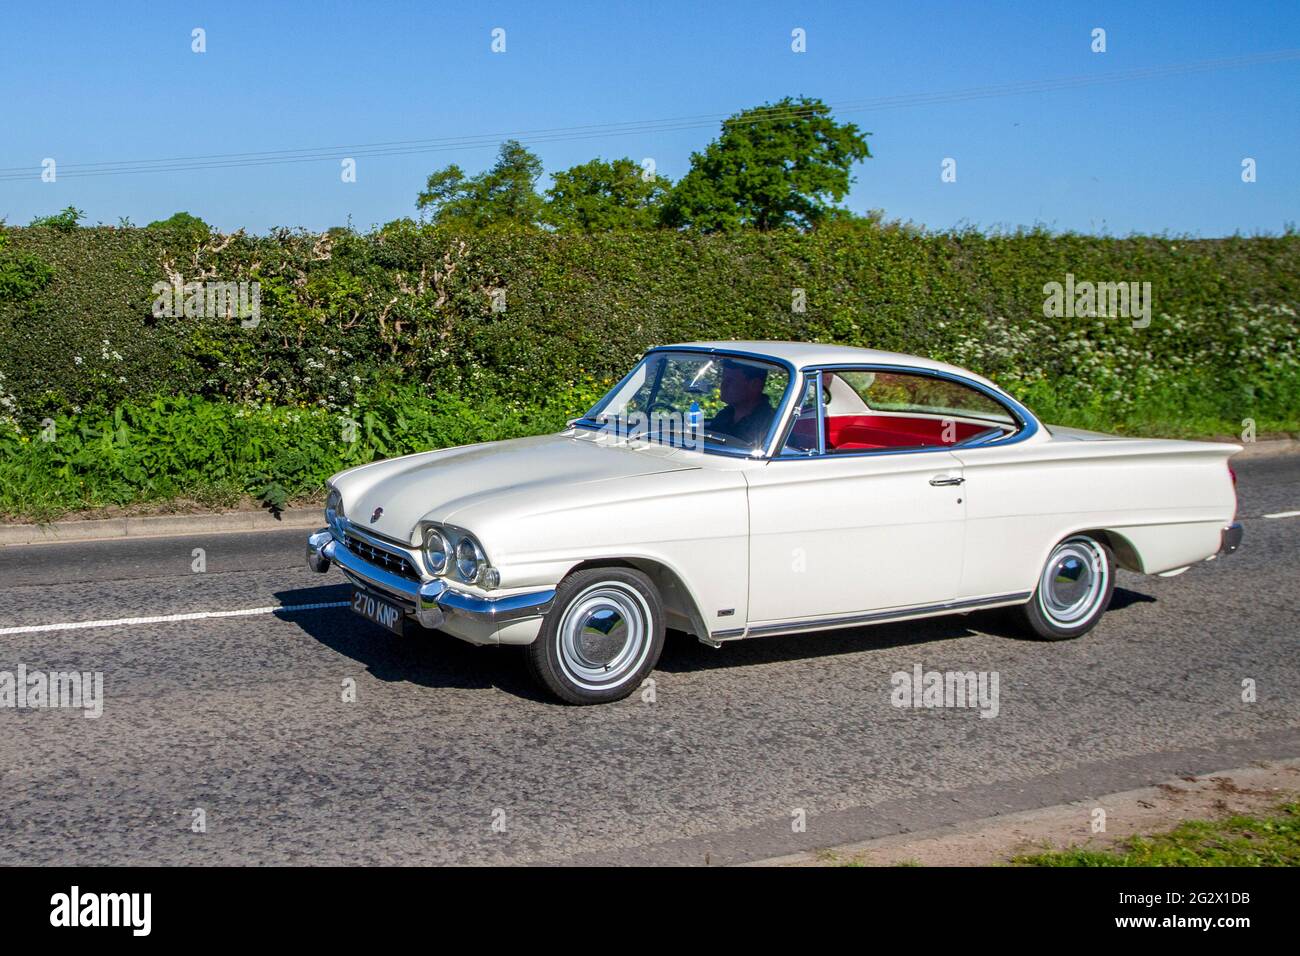 1963 60s white Ford Capri Gt 1498cc petrol 2dr two-door coupé, en-route to Capesthorne Hall classic May car show, Cheshire, UK Stock Photo